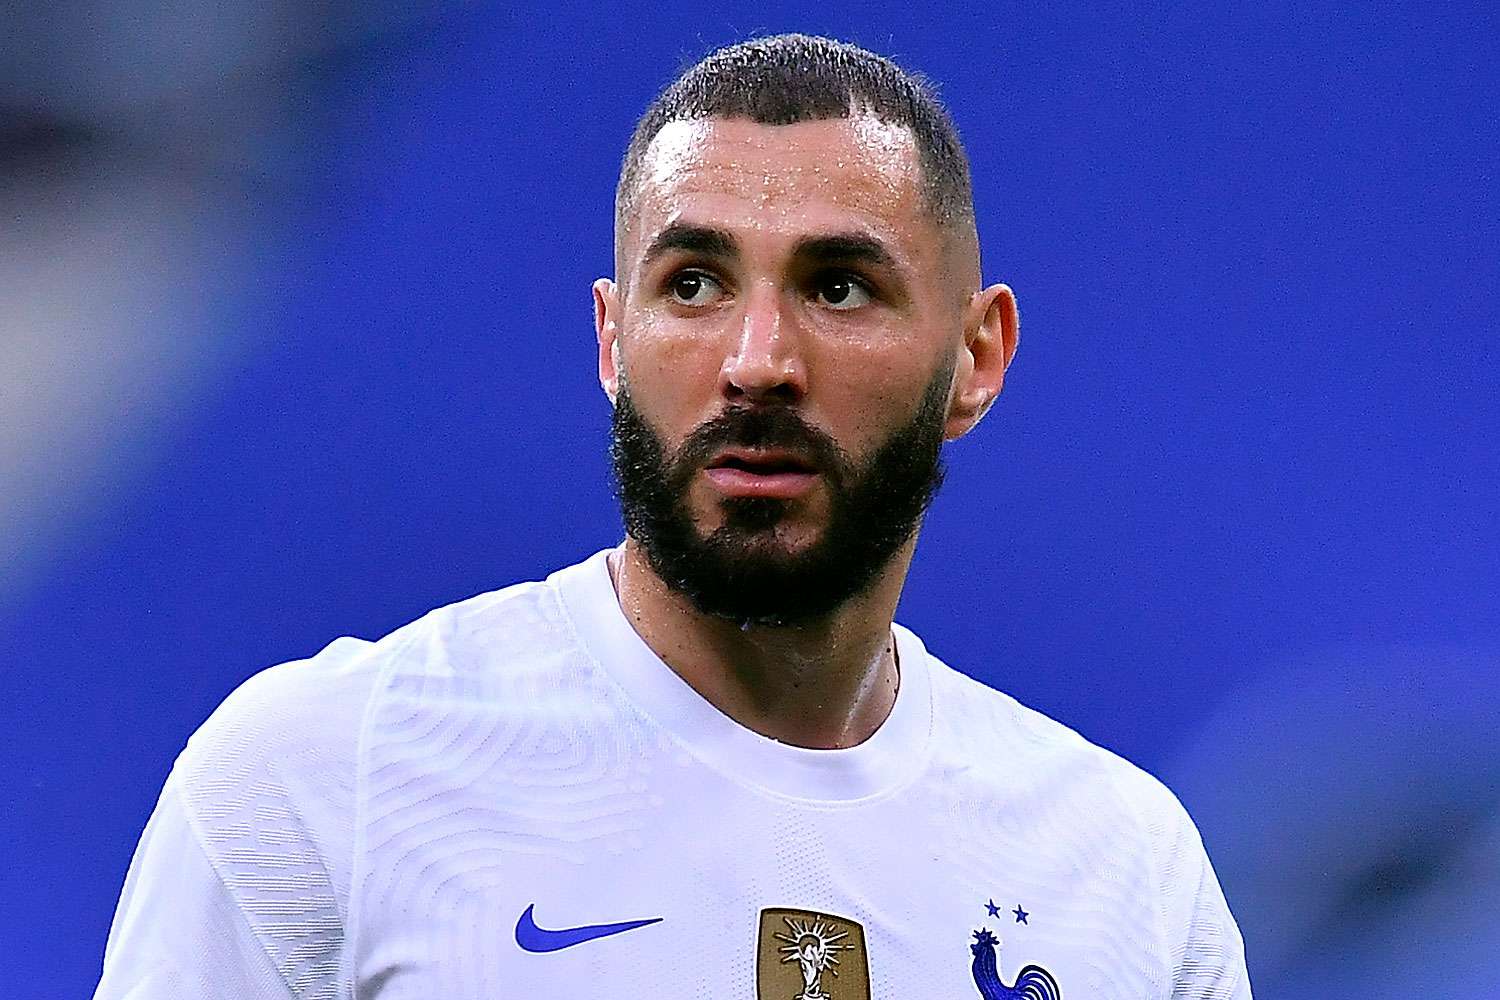 Real Madrid Soccer Star Karim Benzema Found Guilty in Sex Tape Scandal | PEOPLE.com